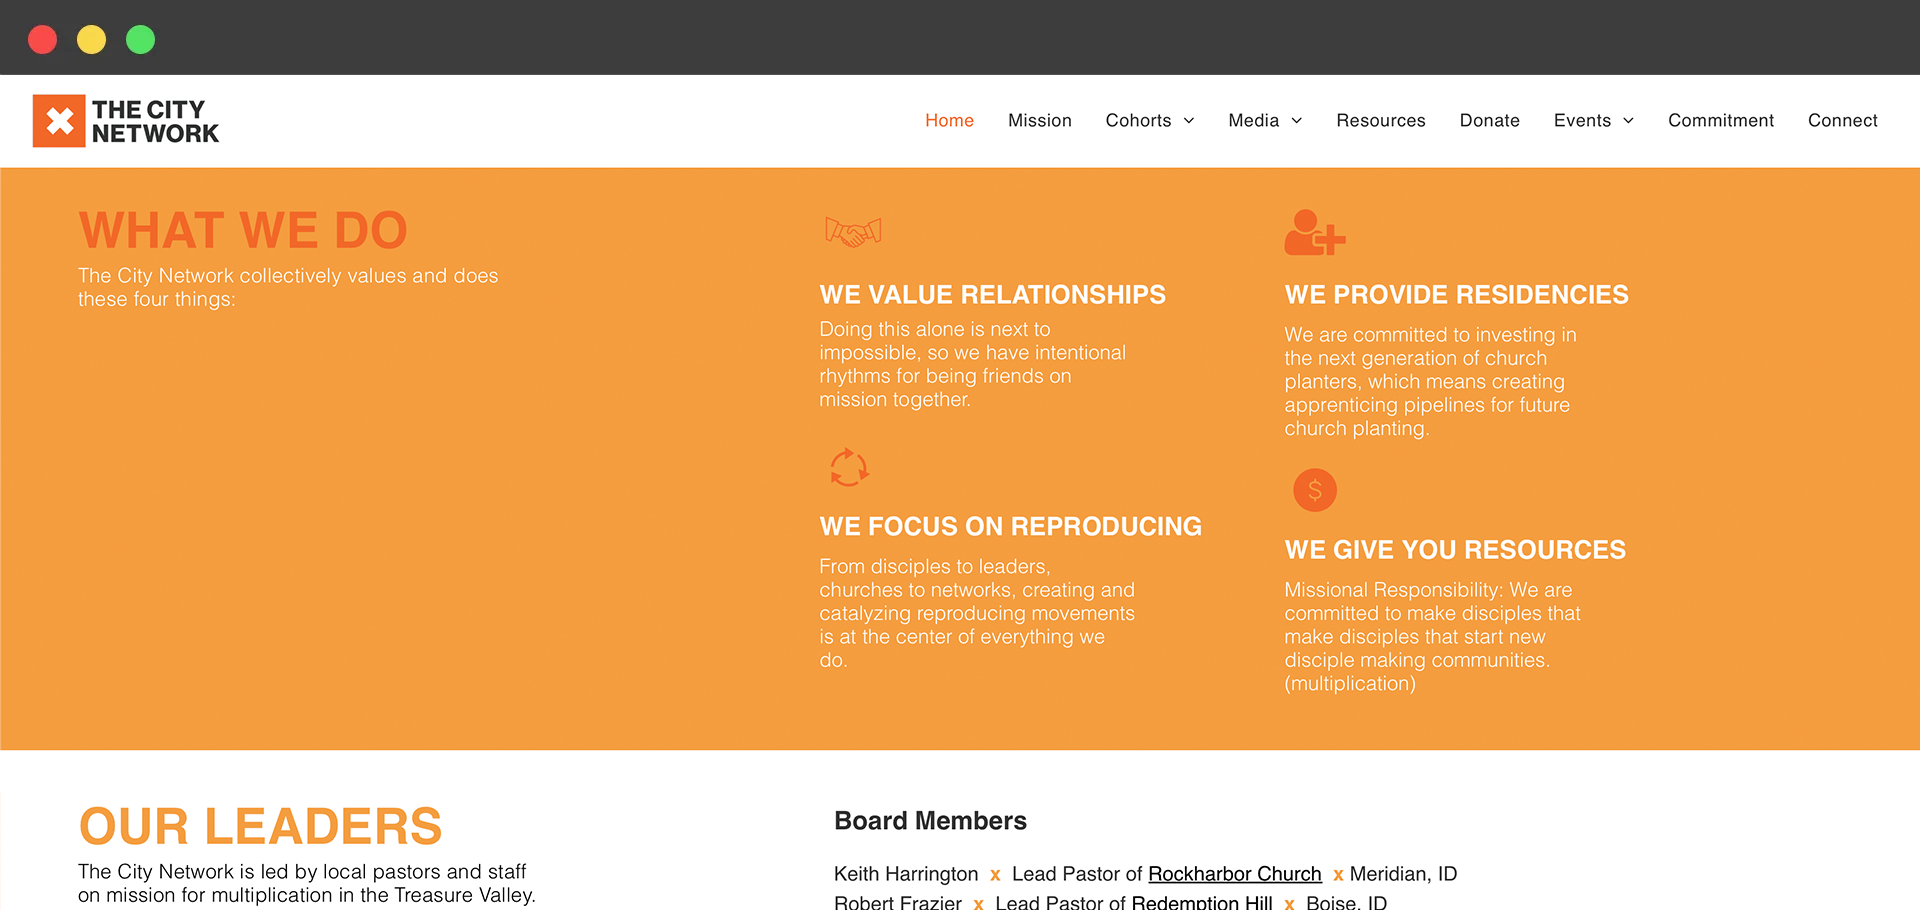 A screenshot of a website showing what we do and our leaders.